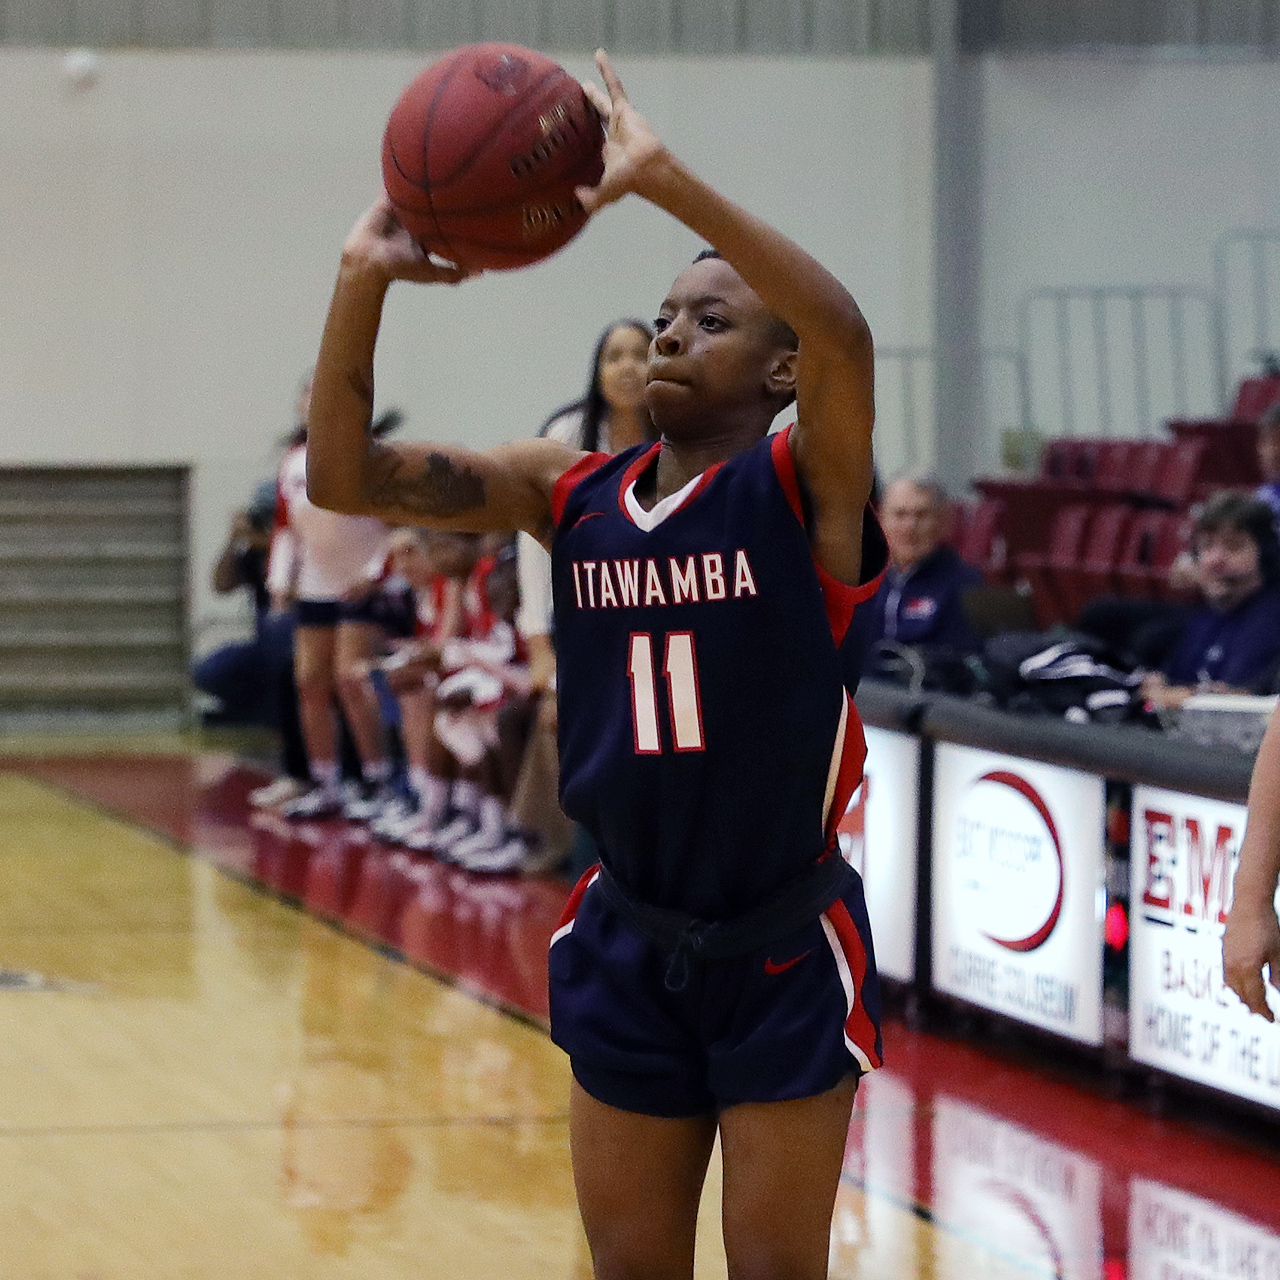 Lady Indians fall in overtime at East Mississippi